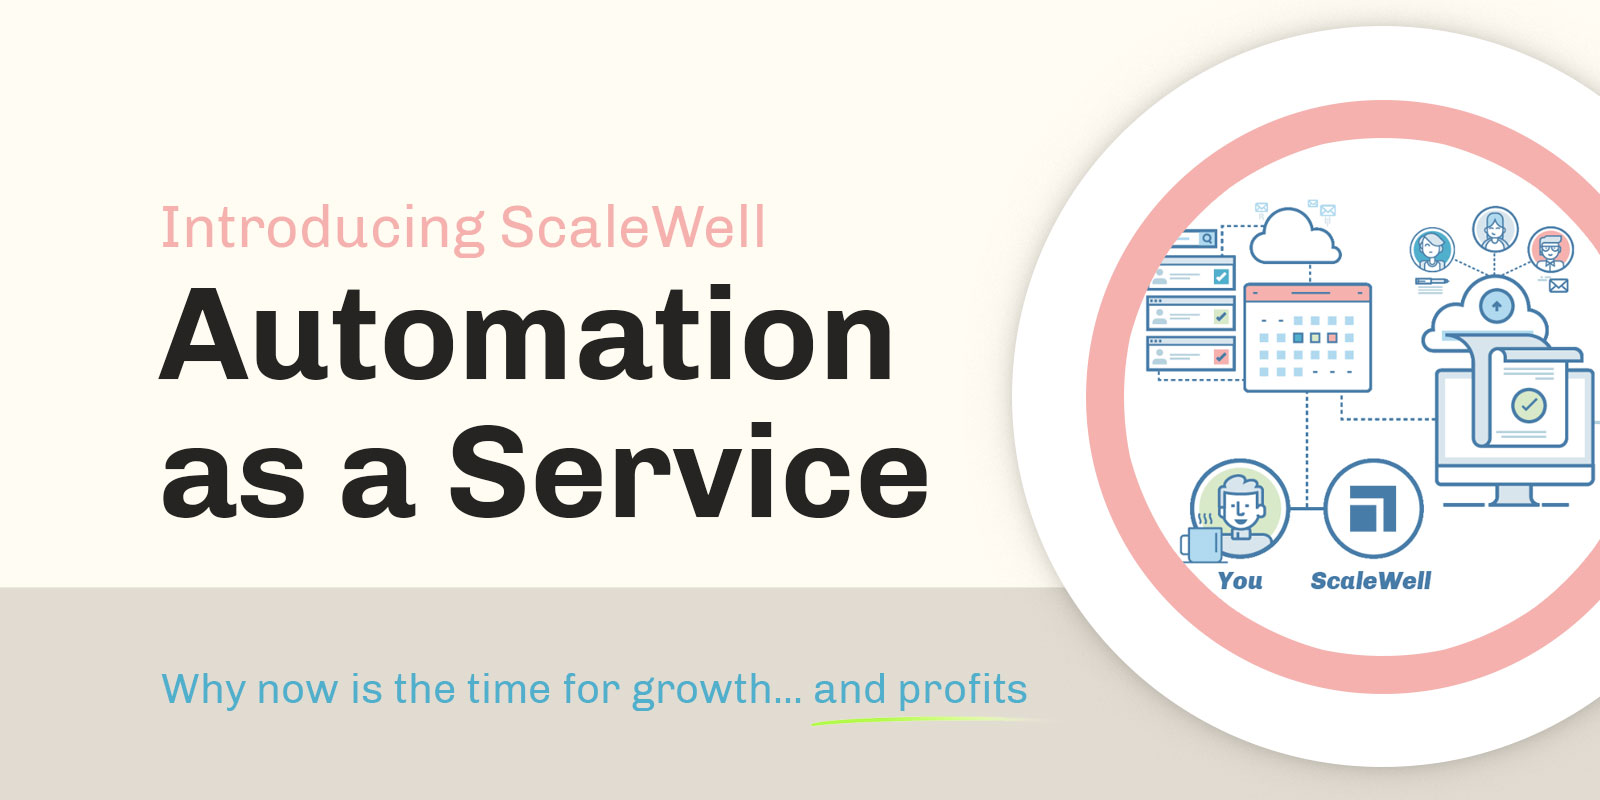 Automate to Elevate: Why Now Is the Time for ScaleWell